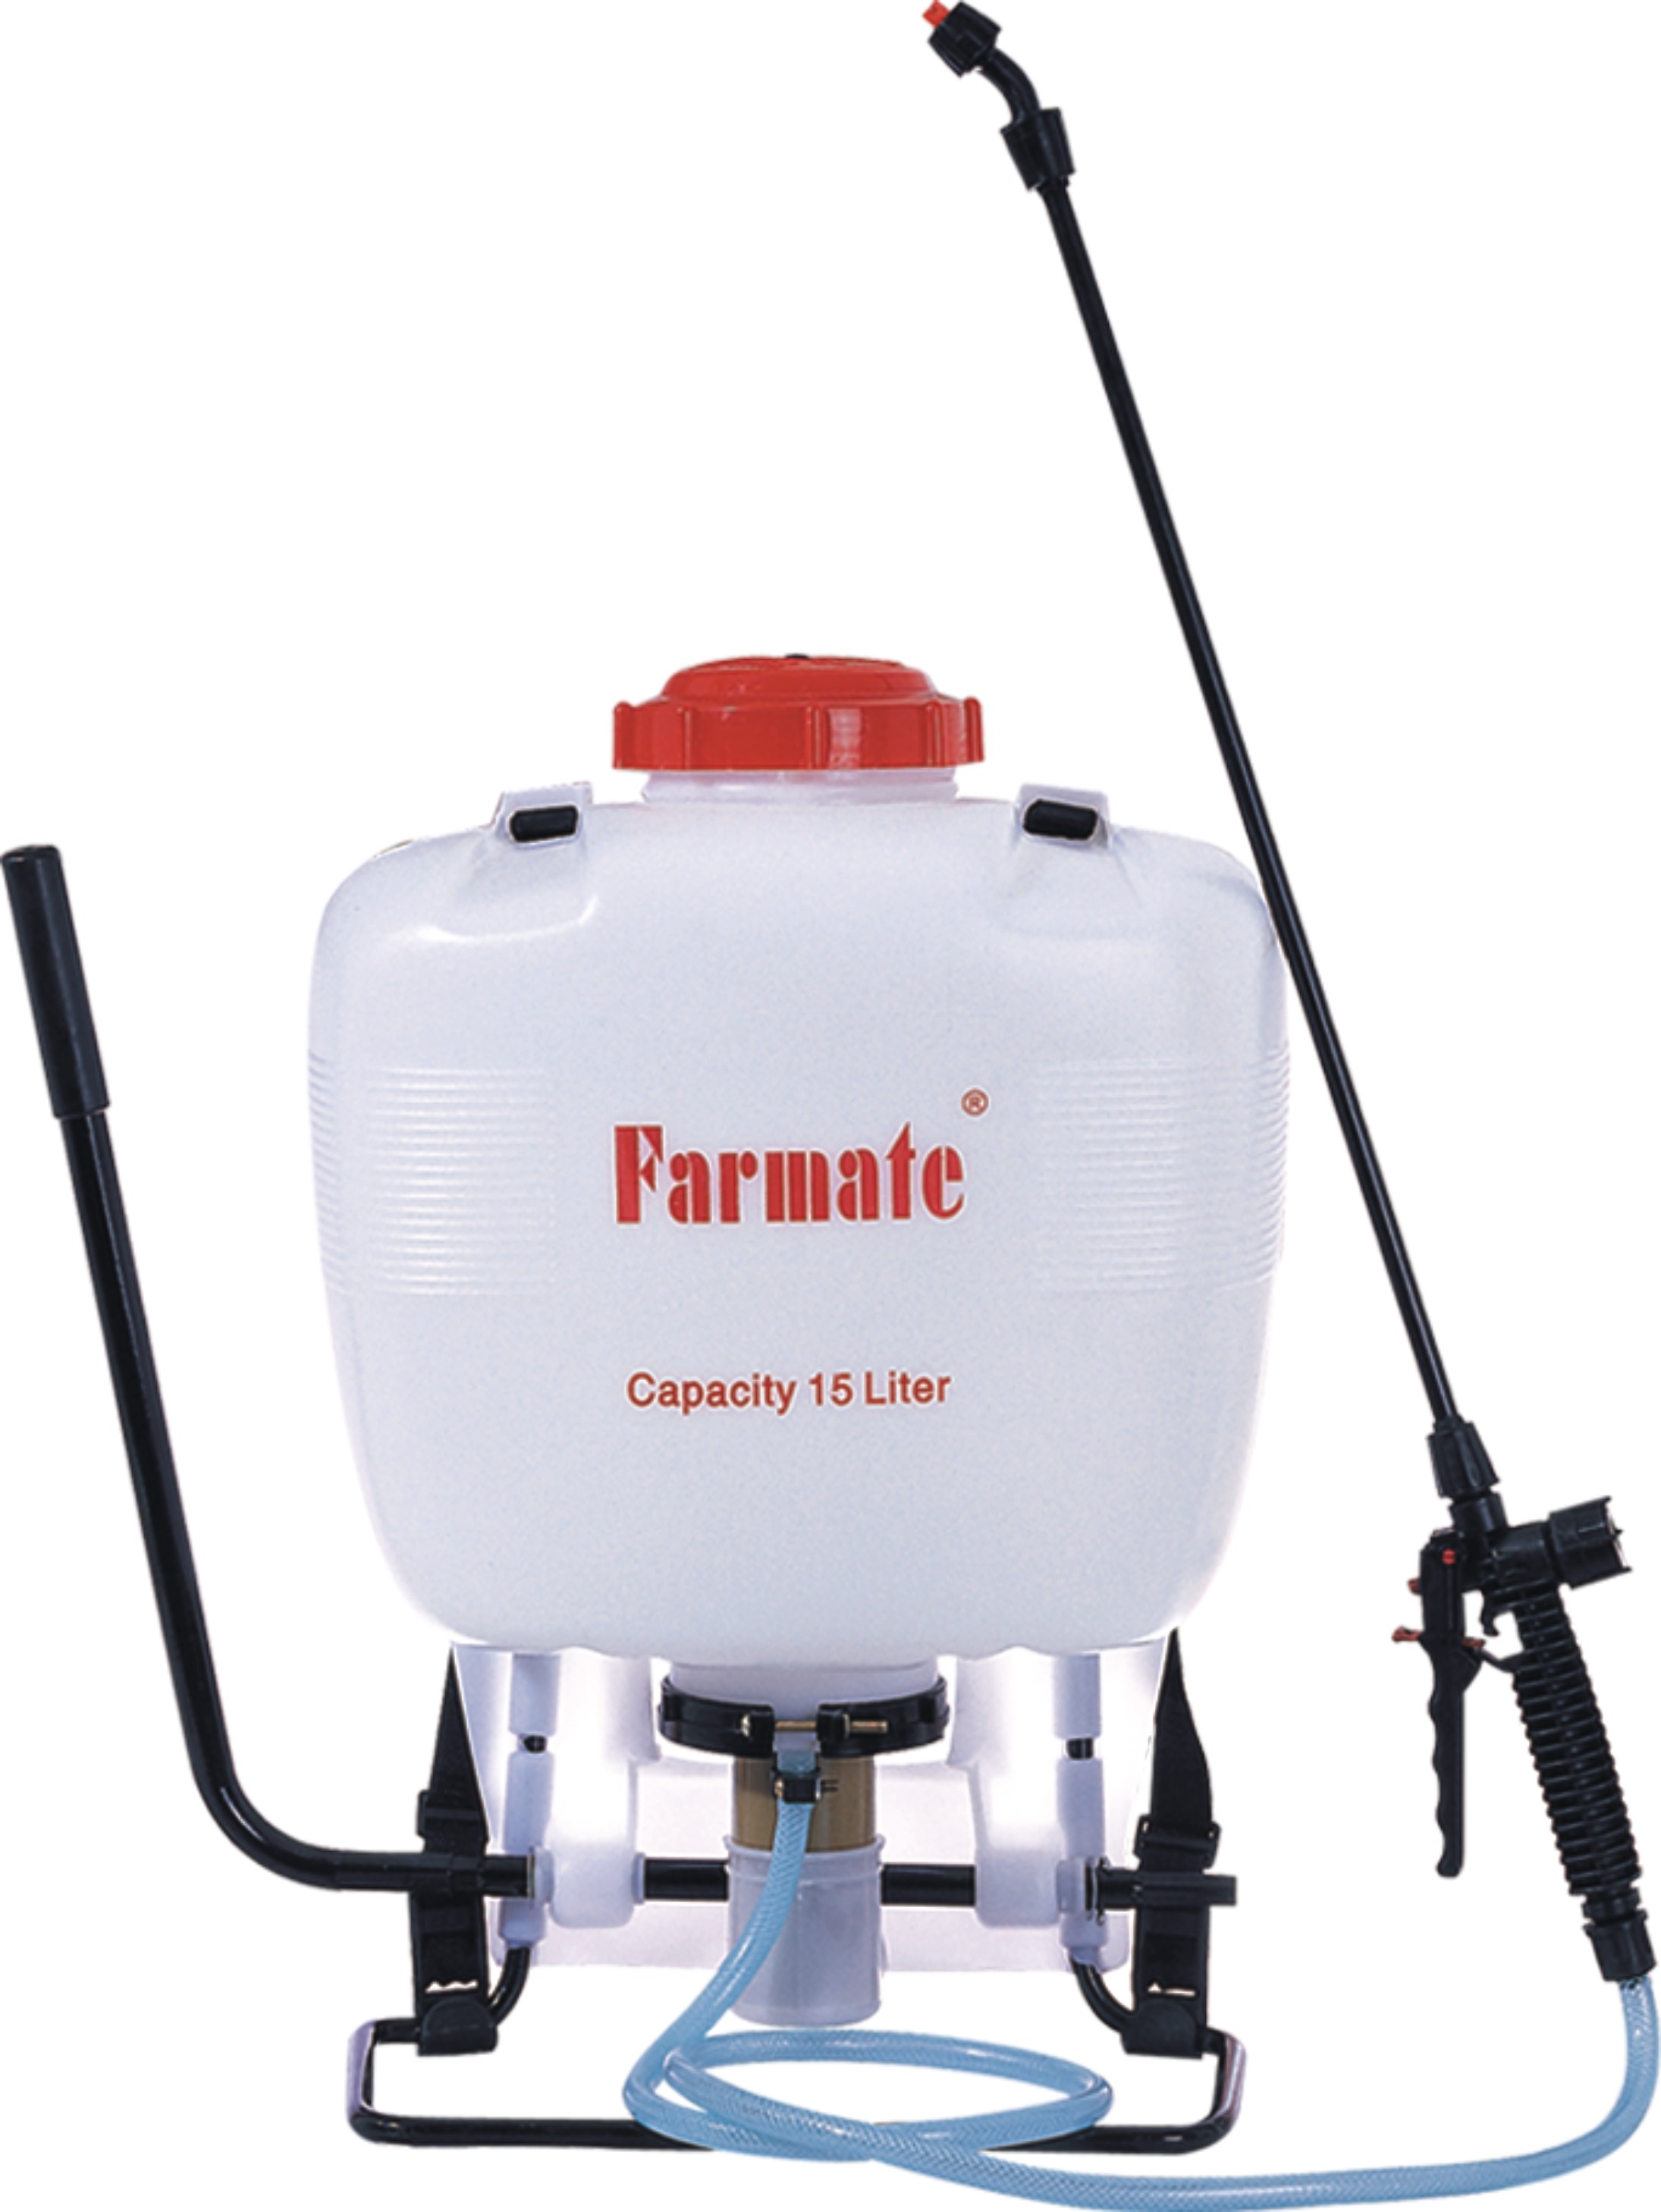 Pressurized Manual Sprayer For Pesticides With Long Wand